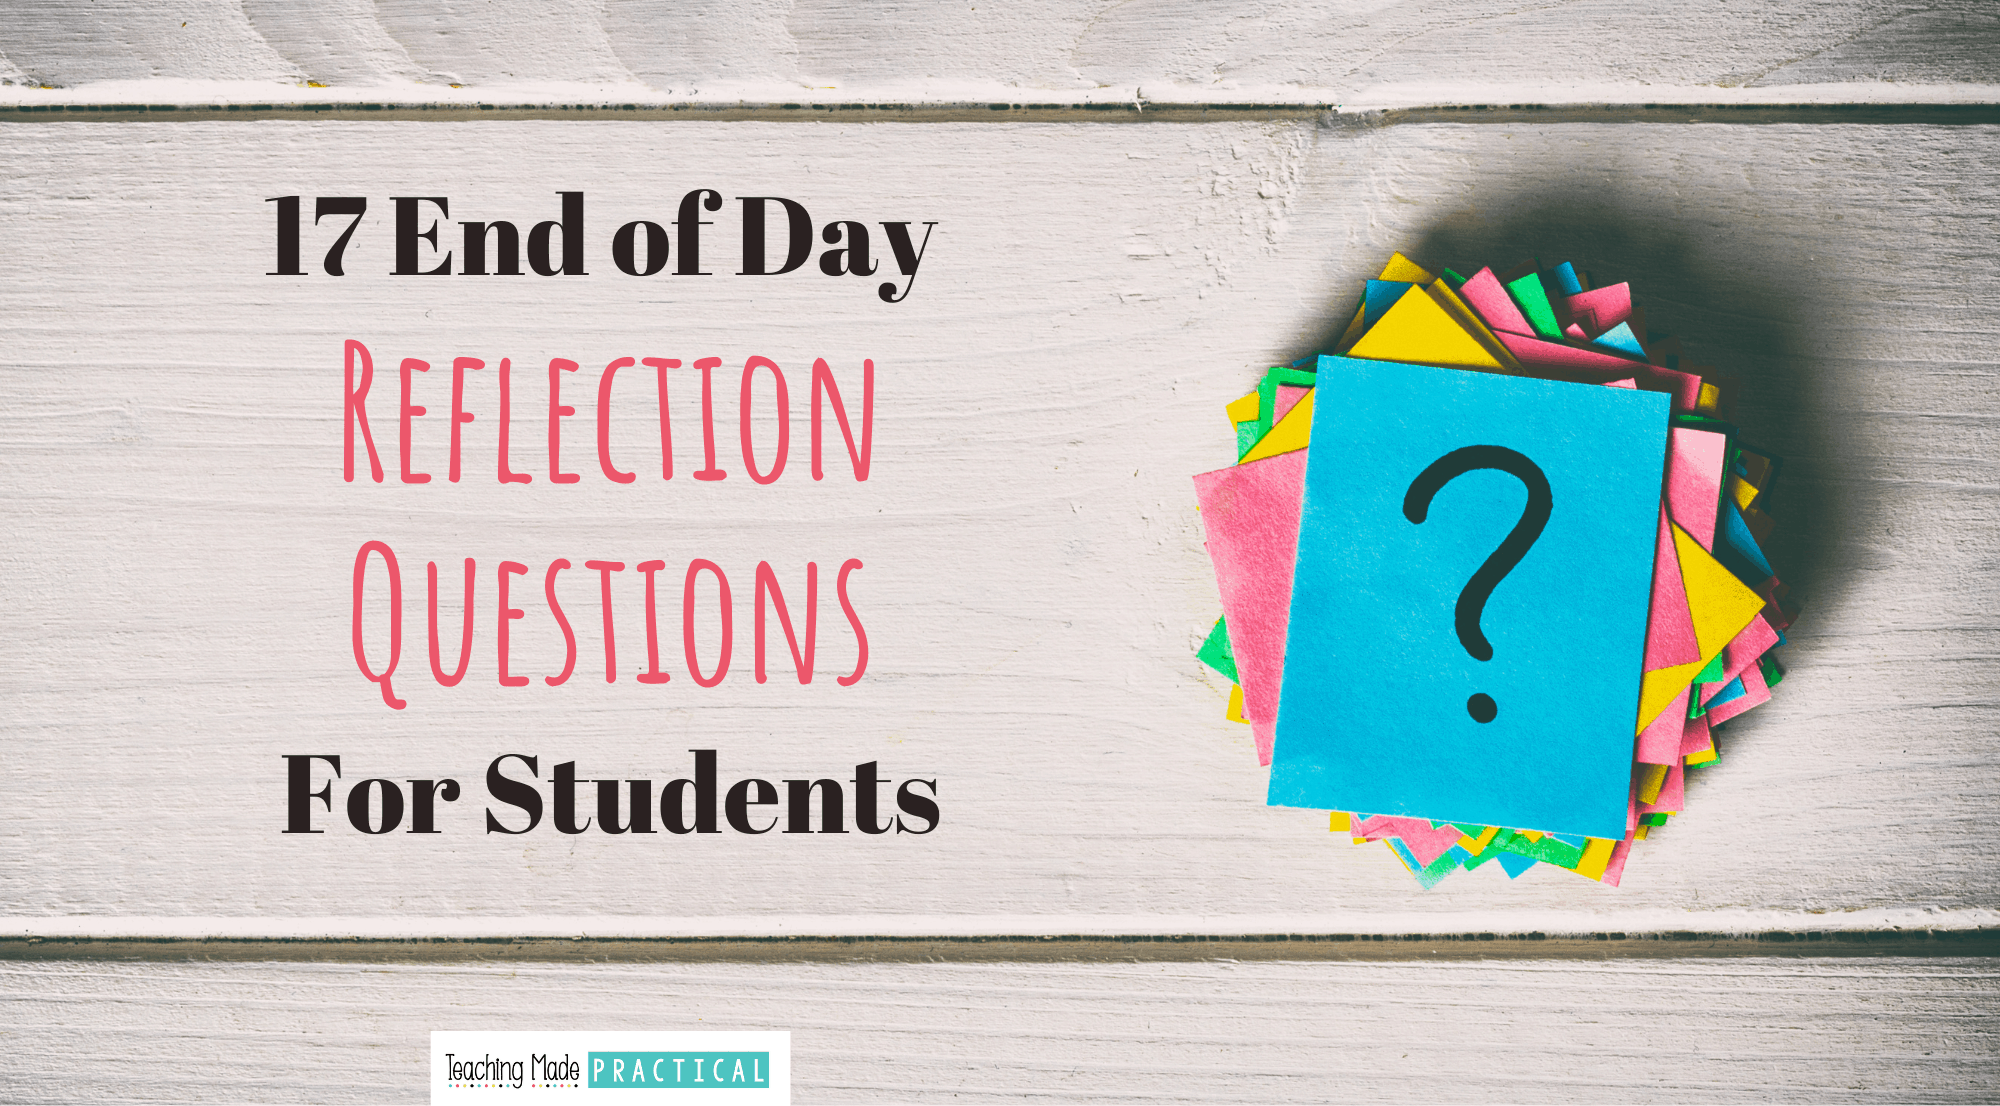 This contains: Reflection Questions for the End of the Day for Upper Elementary